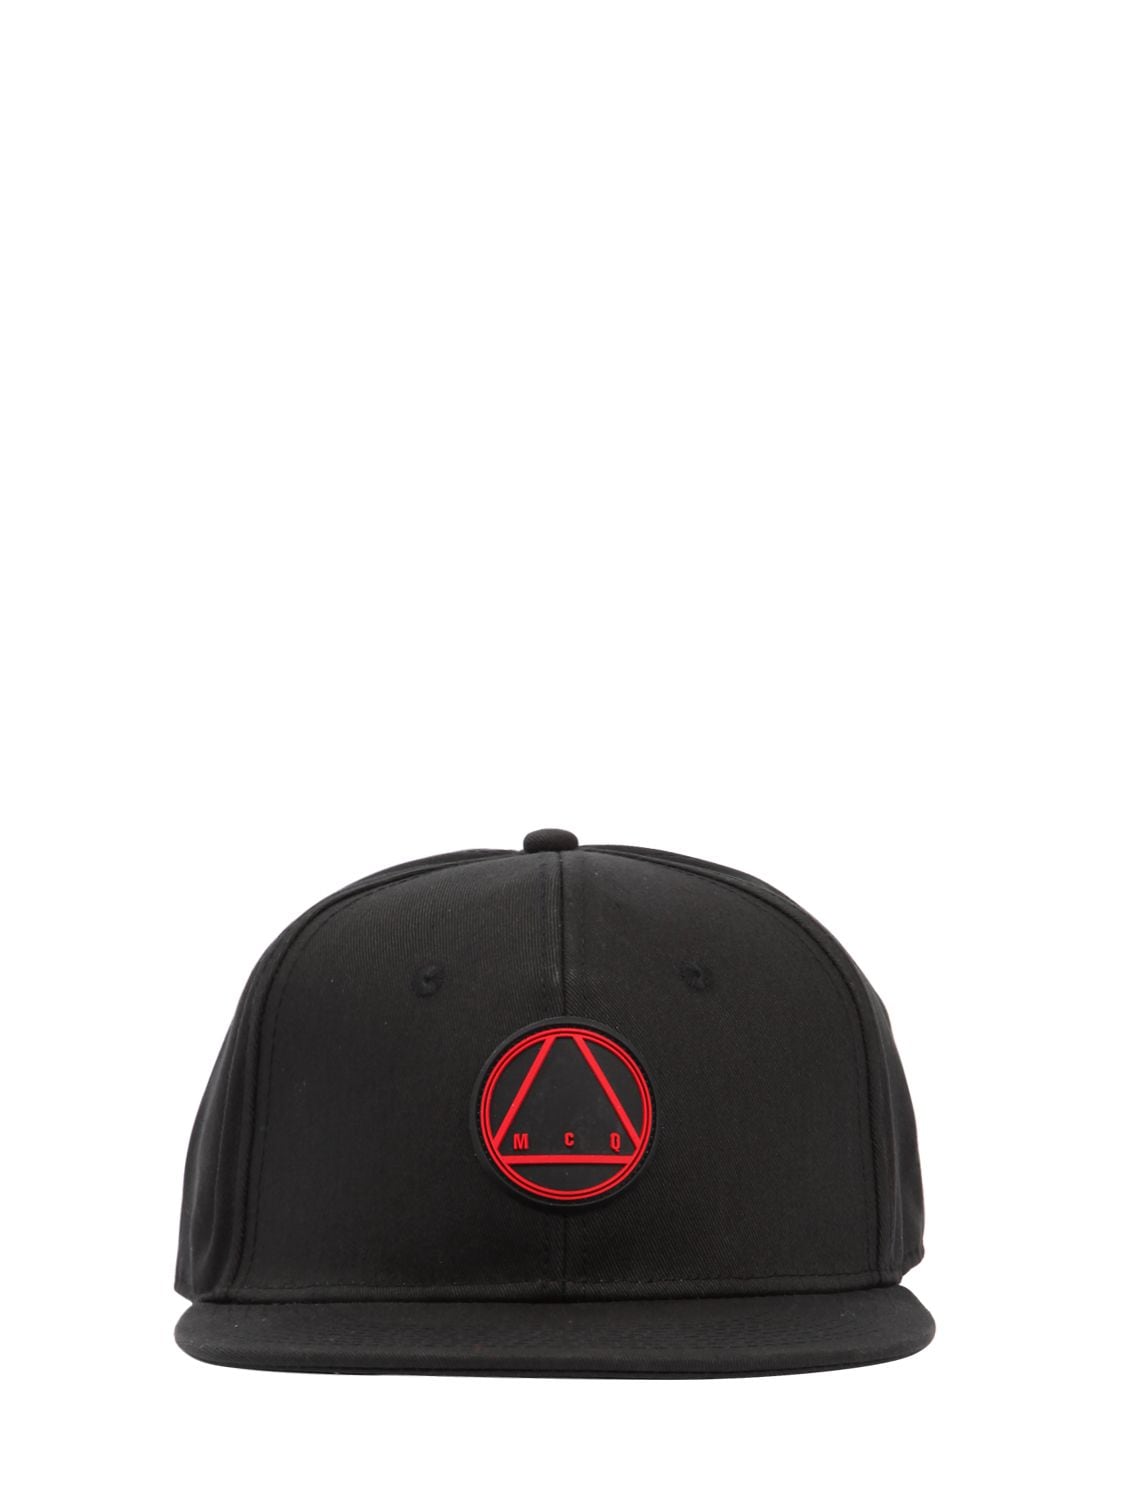 Mcq By Alexander Mcqueen 3d Patch Baseball Cotton Hat In Black/red